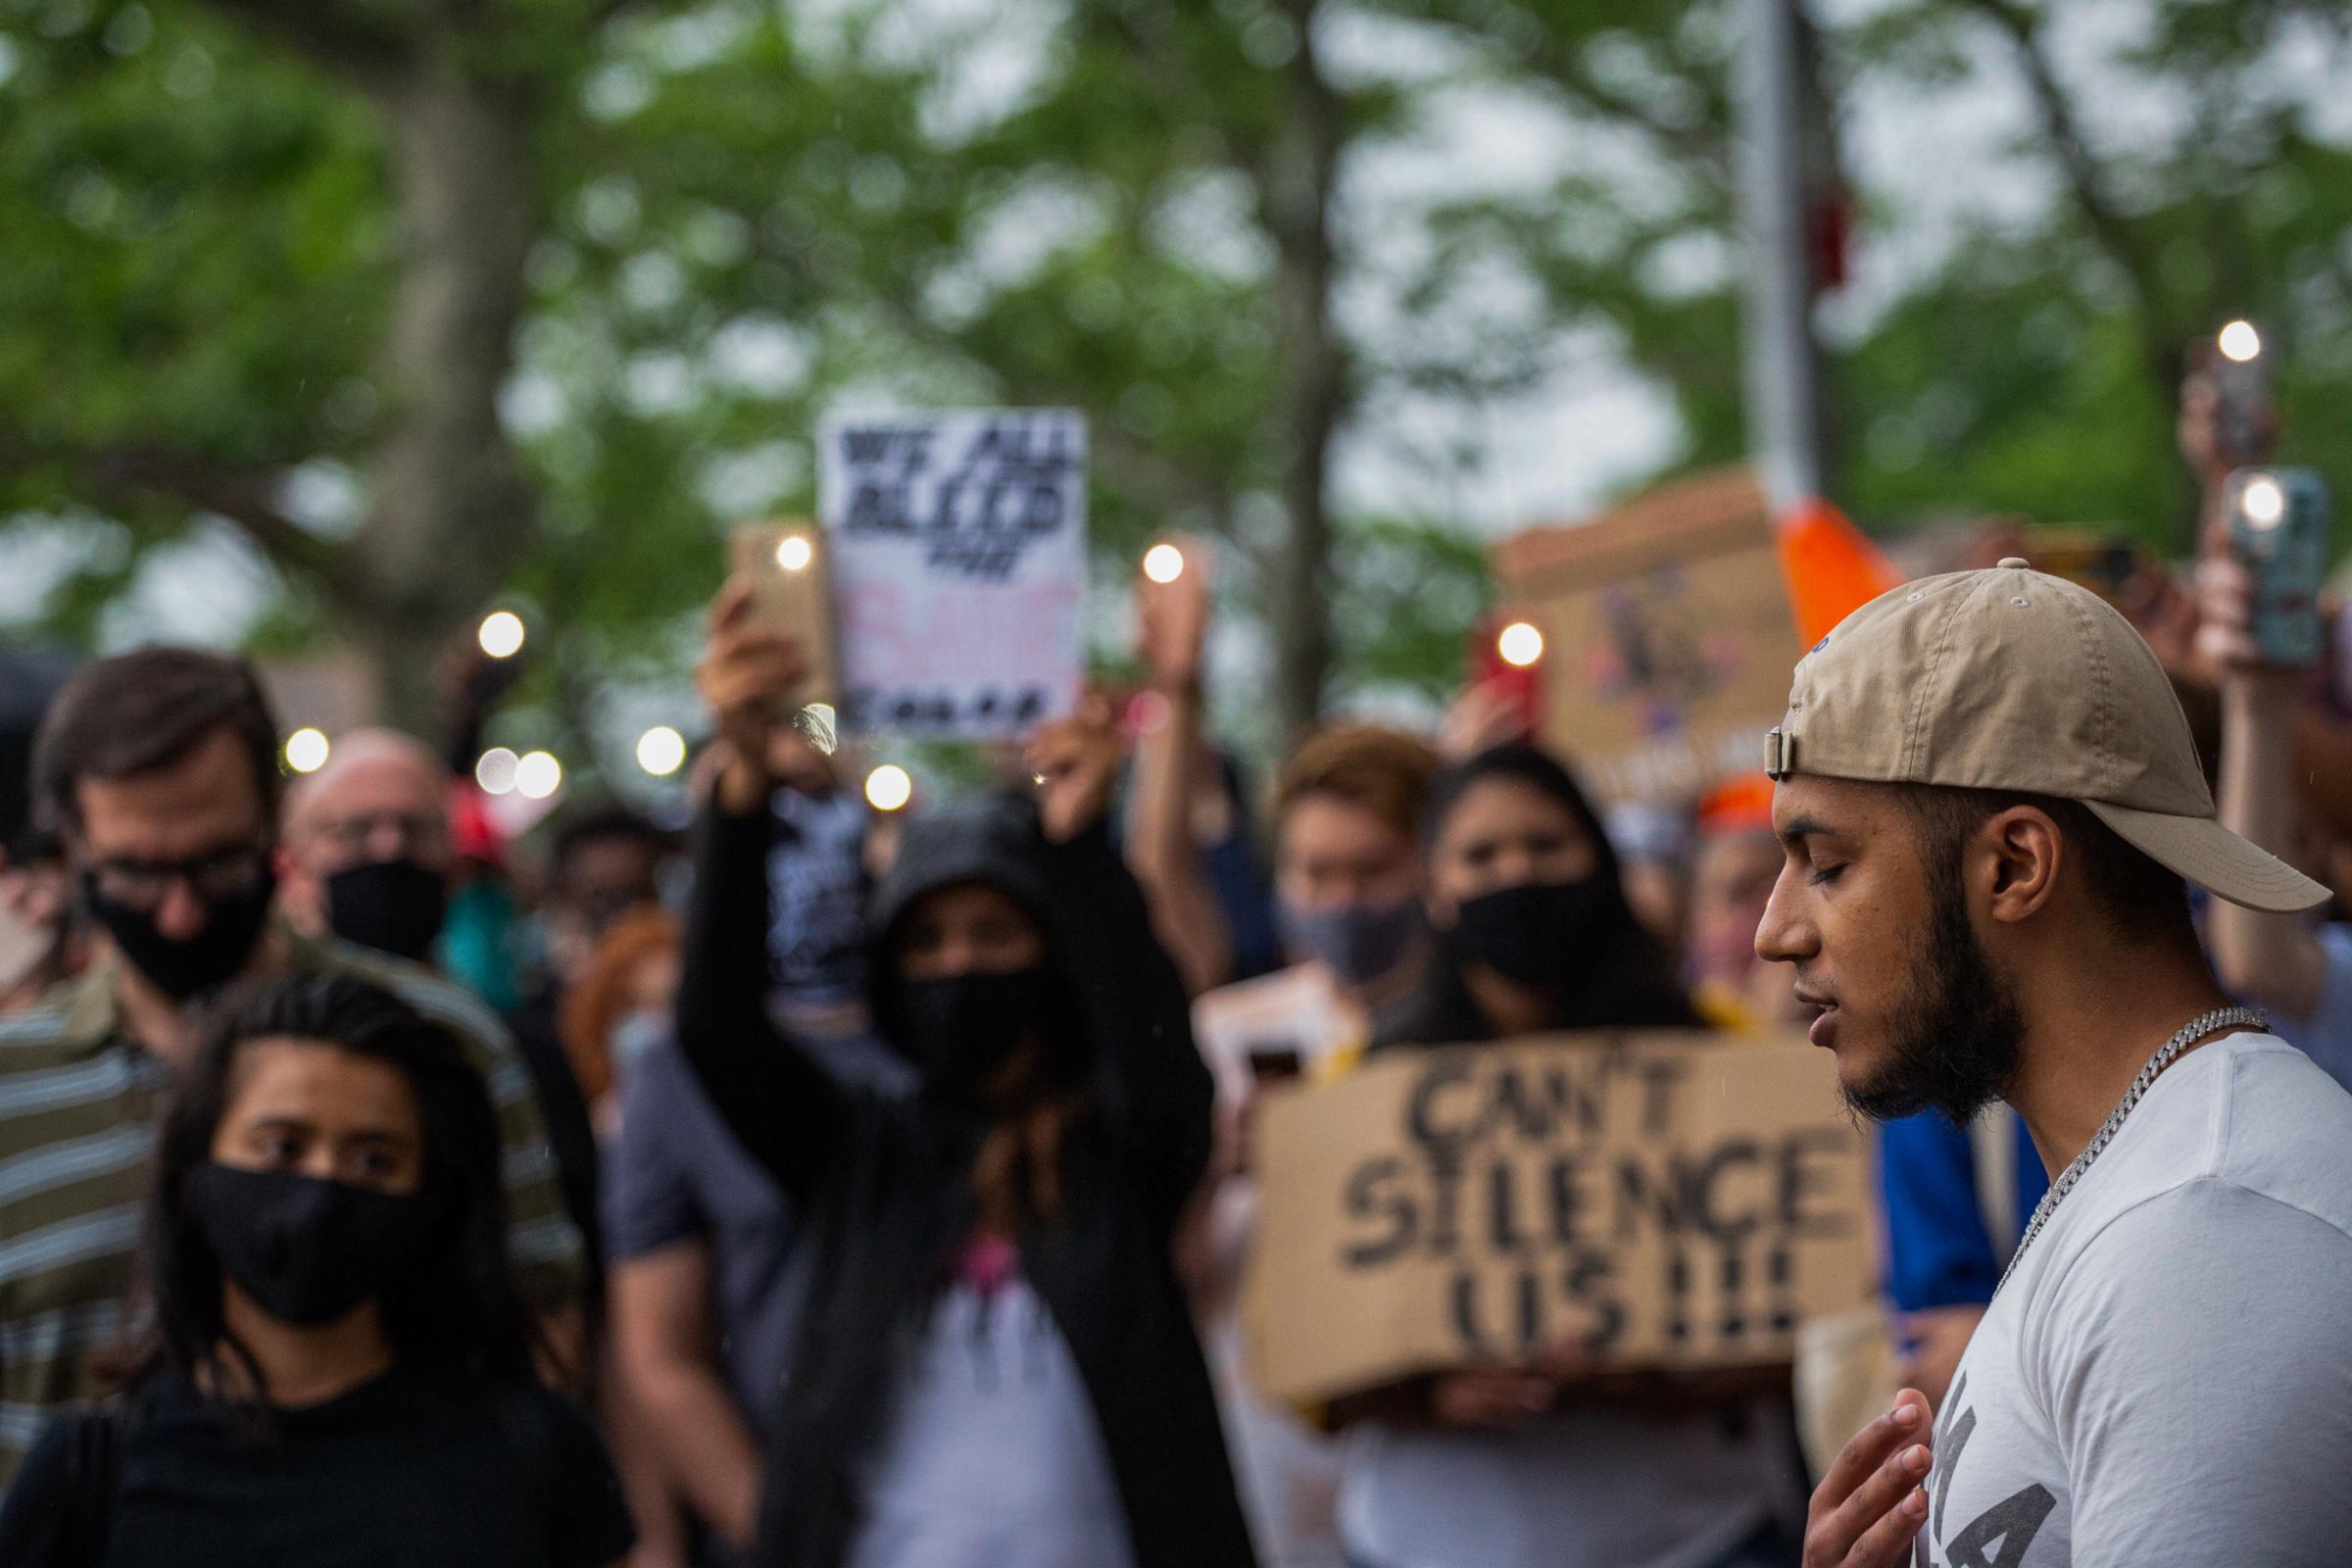 Black Lives Matter Movement 2020 - Navid M. addresses a crowd at a share-out circle during a...